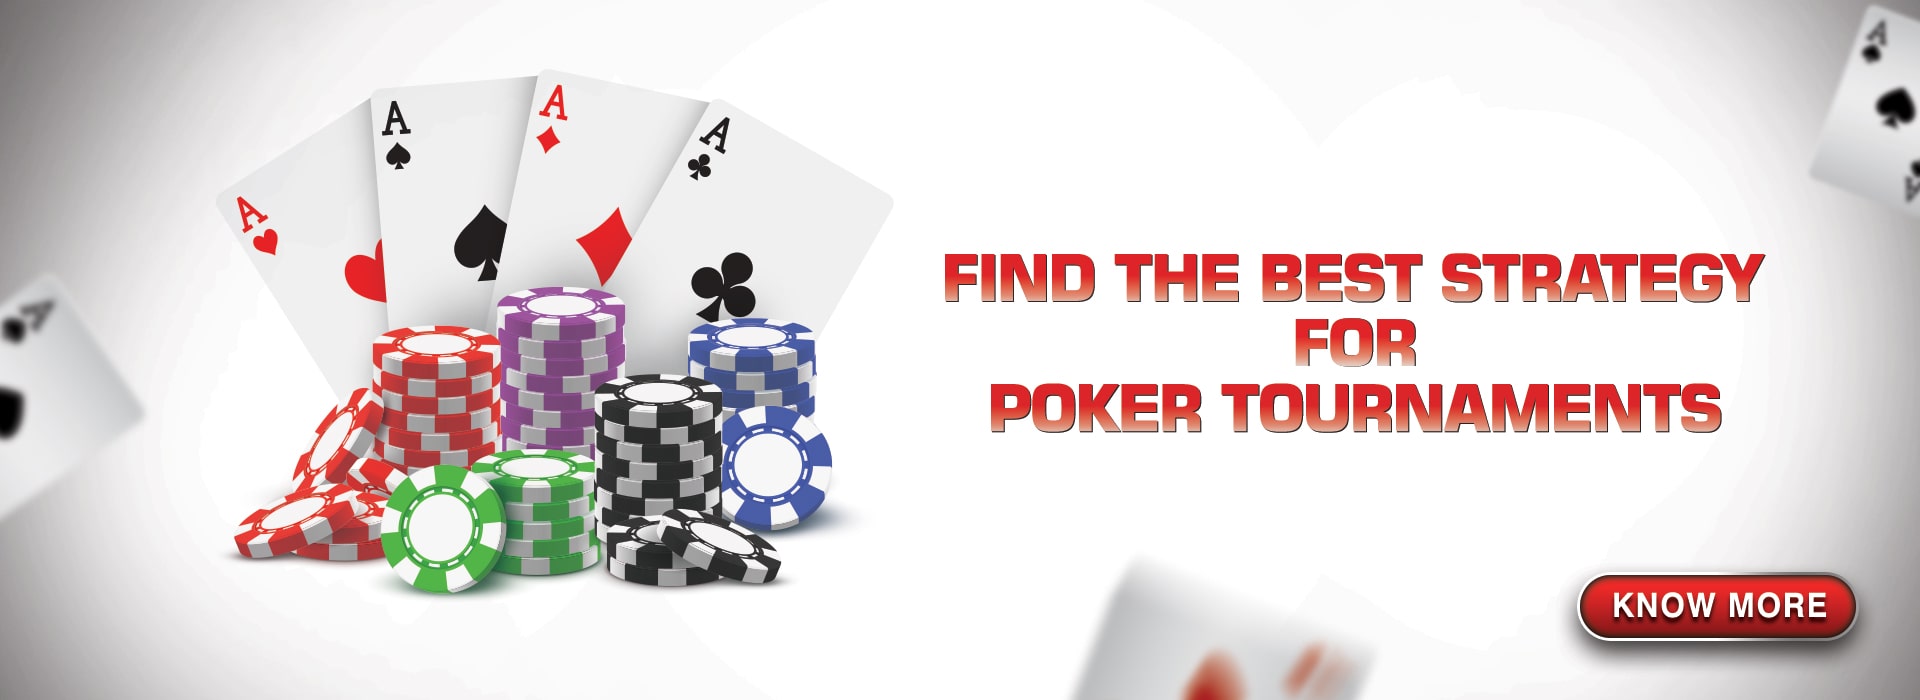 Get the Best Strategy For Poker Tournaments